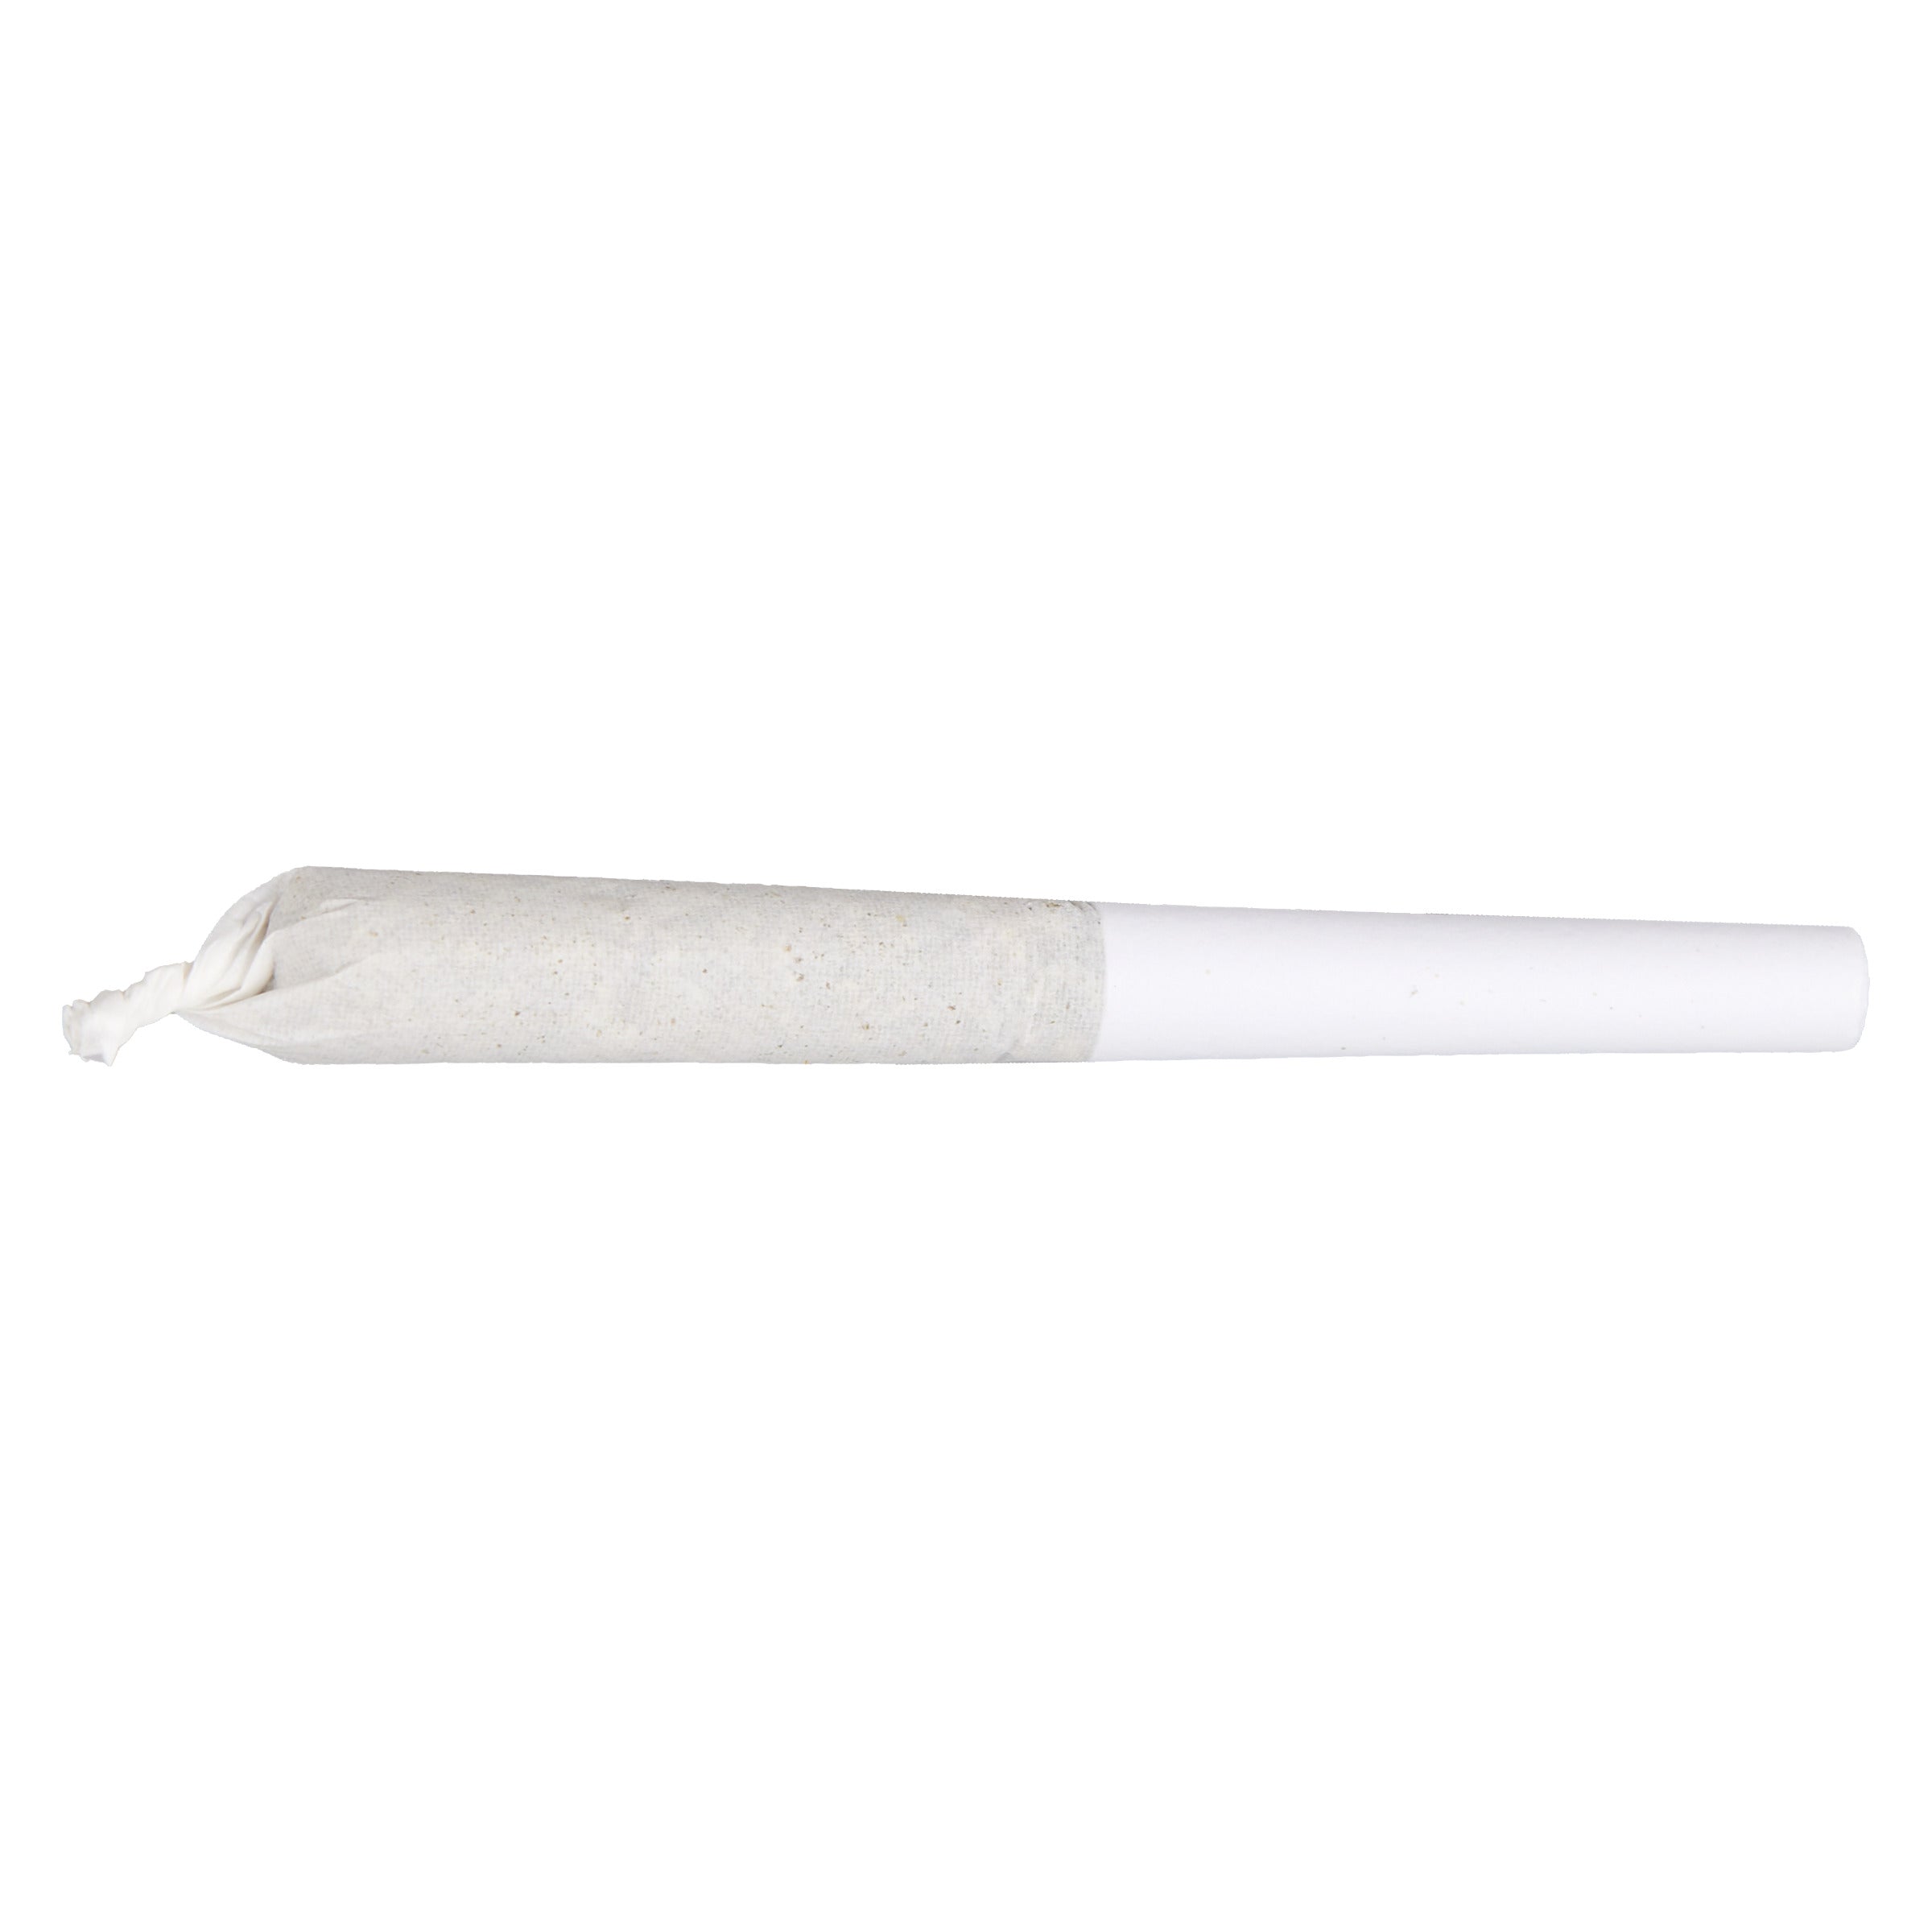 GOOD SUPPLY SWEET BERRY KUSH (IND) PRE-ROLL - 0.5G X 14